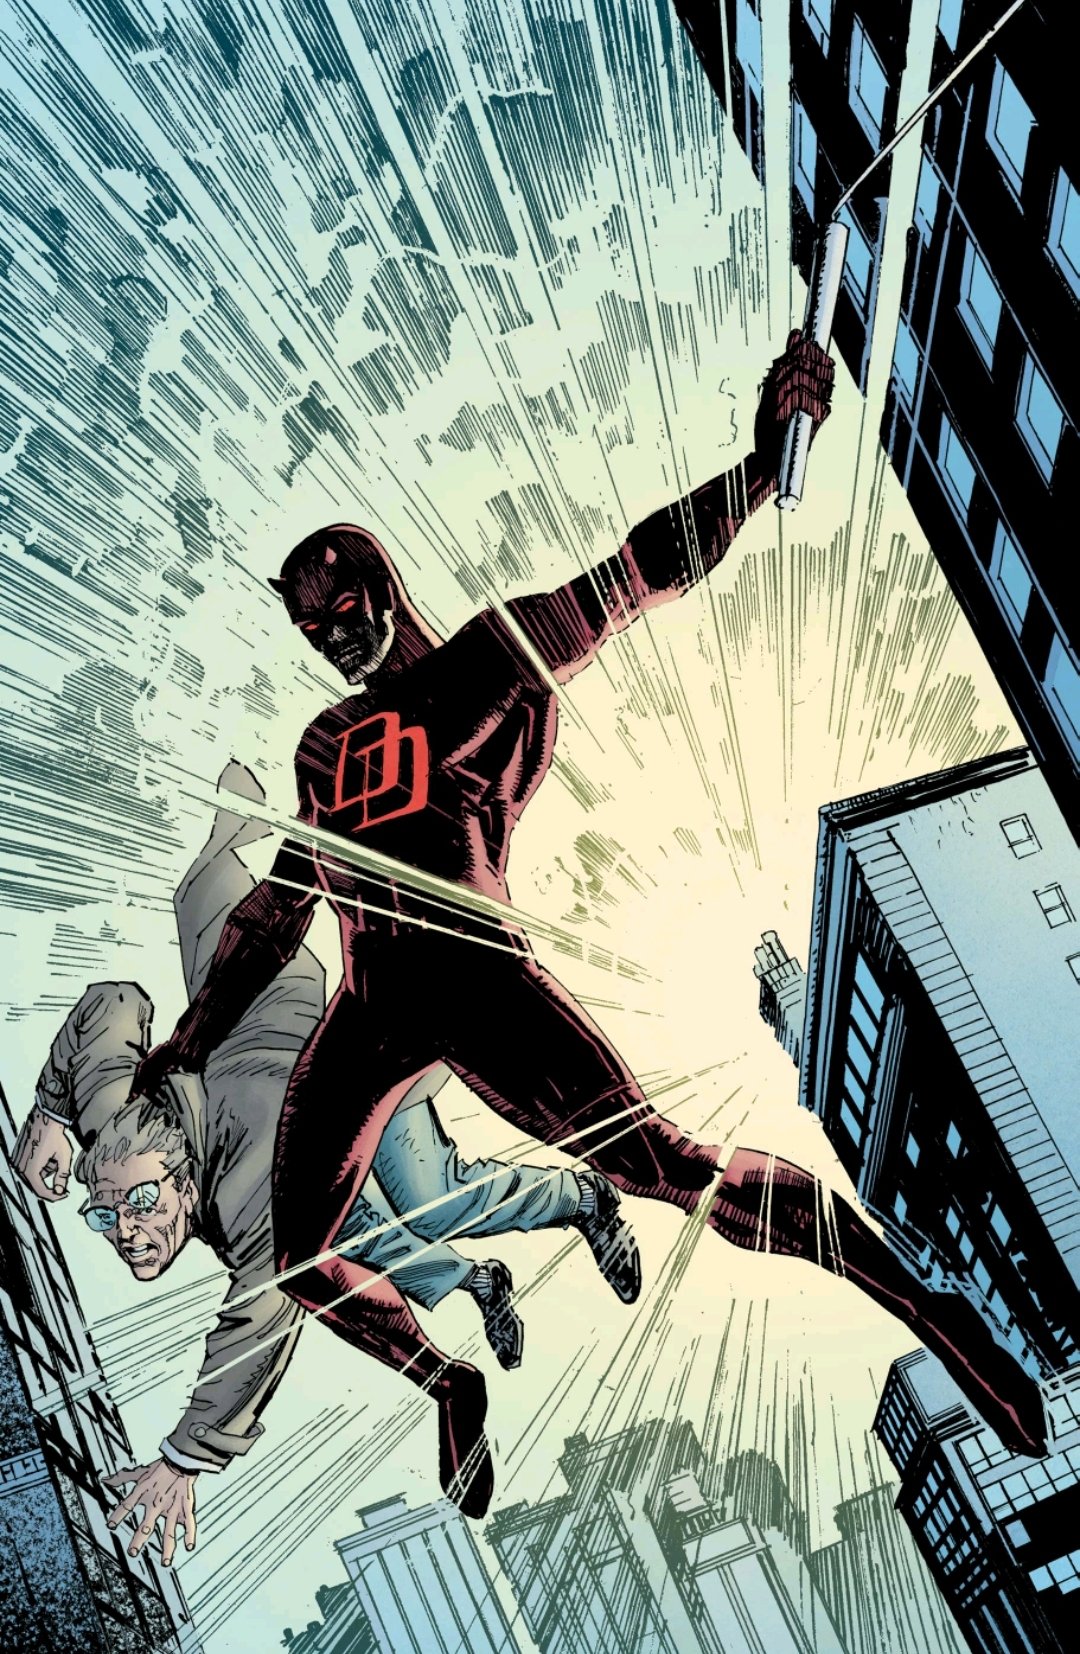 Daredevil rescuing Ben Urich from falling